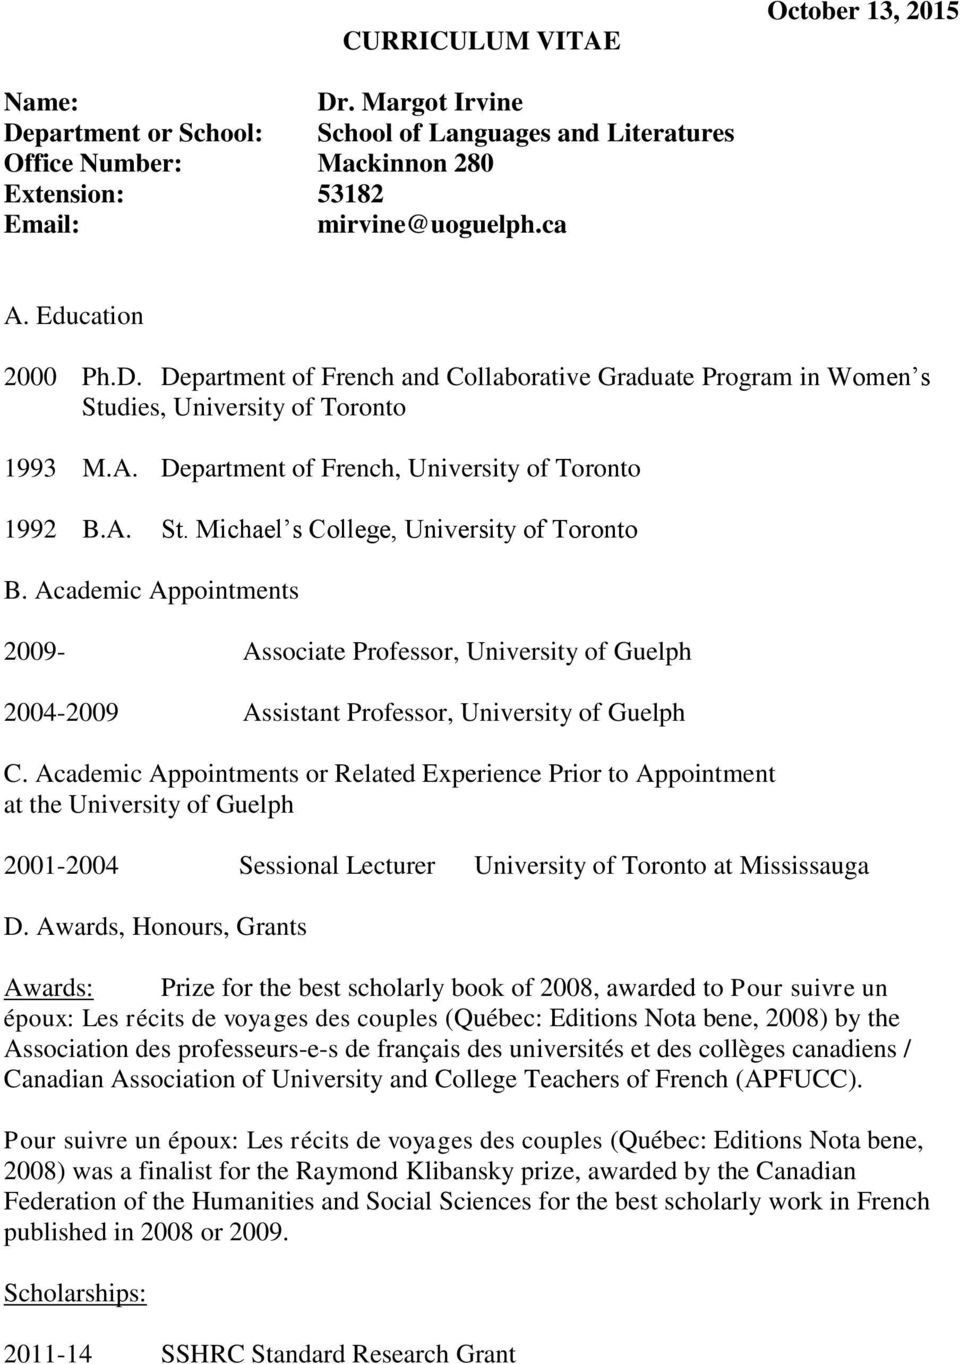 Academic Appointments 2009- Associate Professor, University of Guelph 2004-2009 Assistant Professor, University of Guelph C.